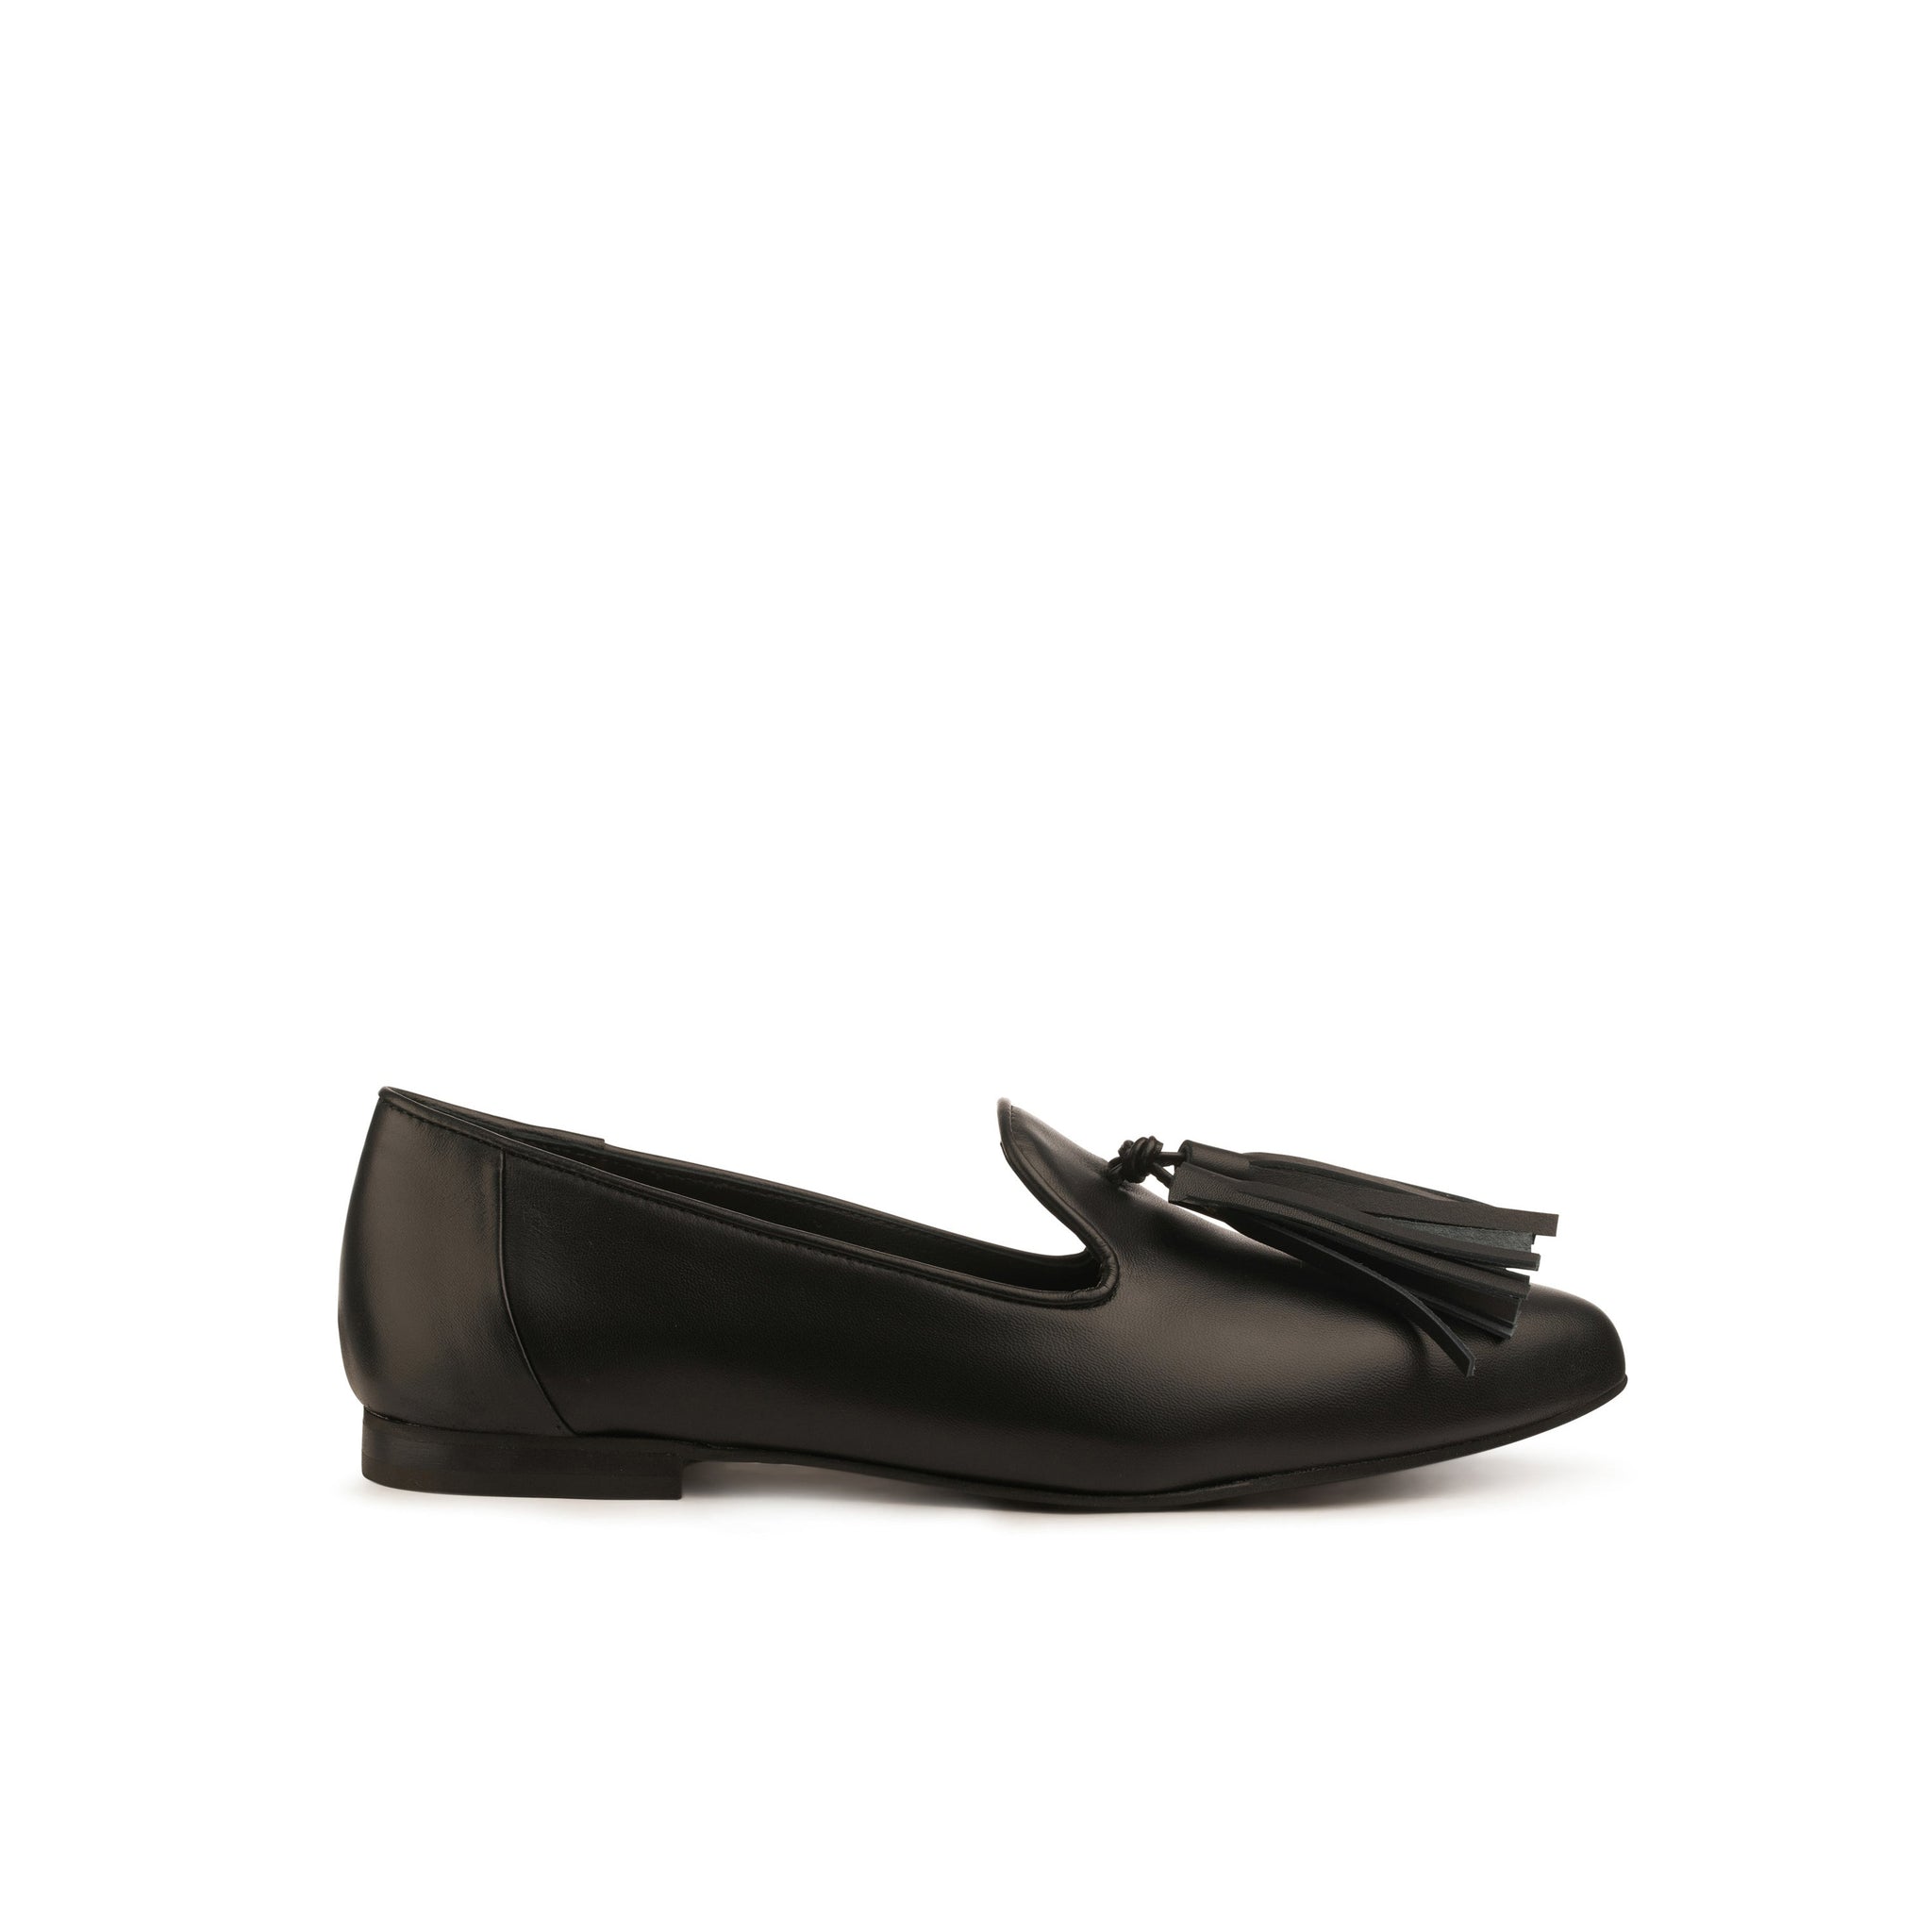 Trino Flexlite Loafers | Women’s Loafers | Italian Leather Shoes ...